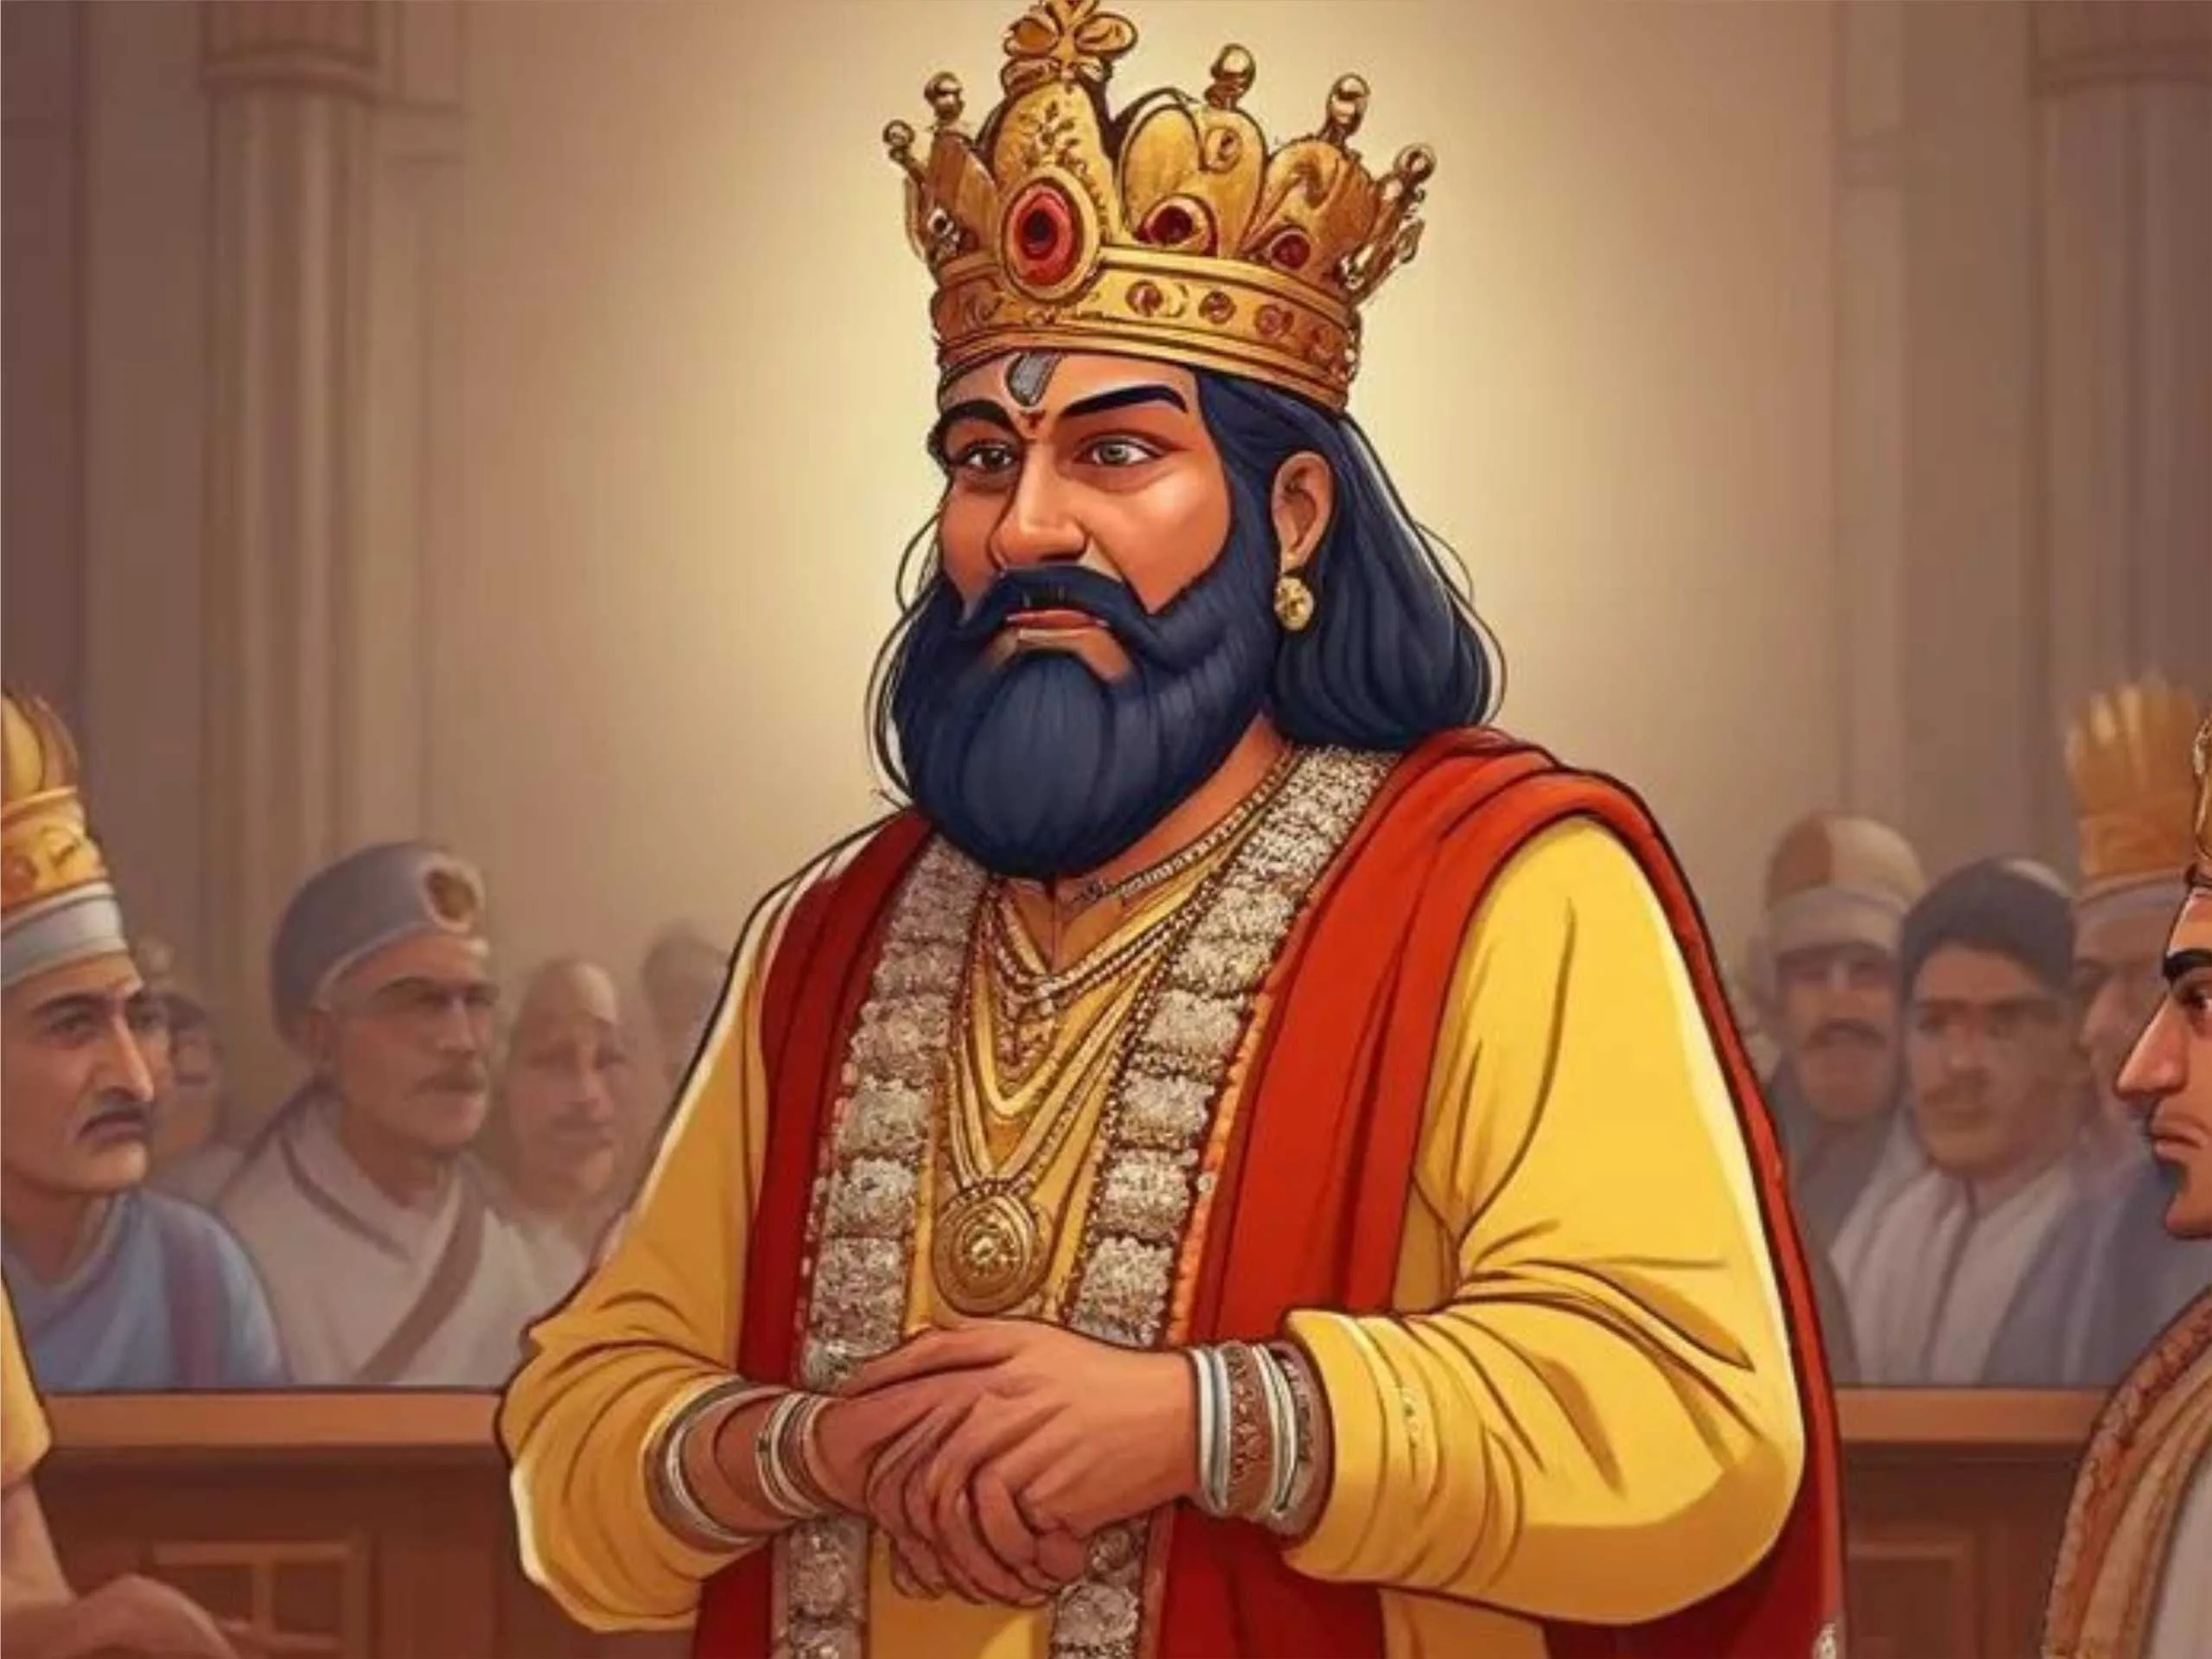 Indian King In his court cartoon image